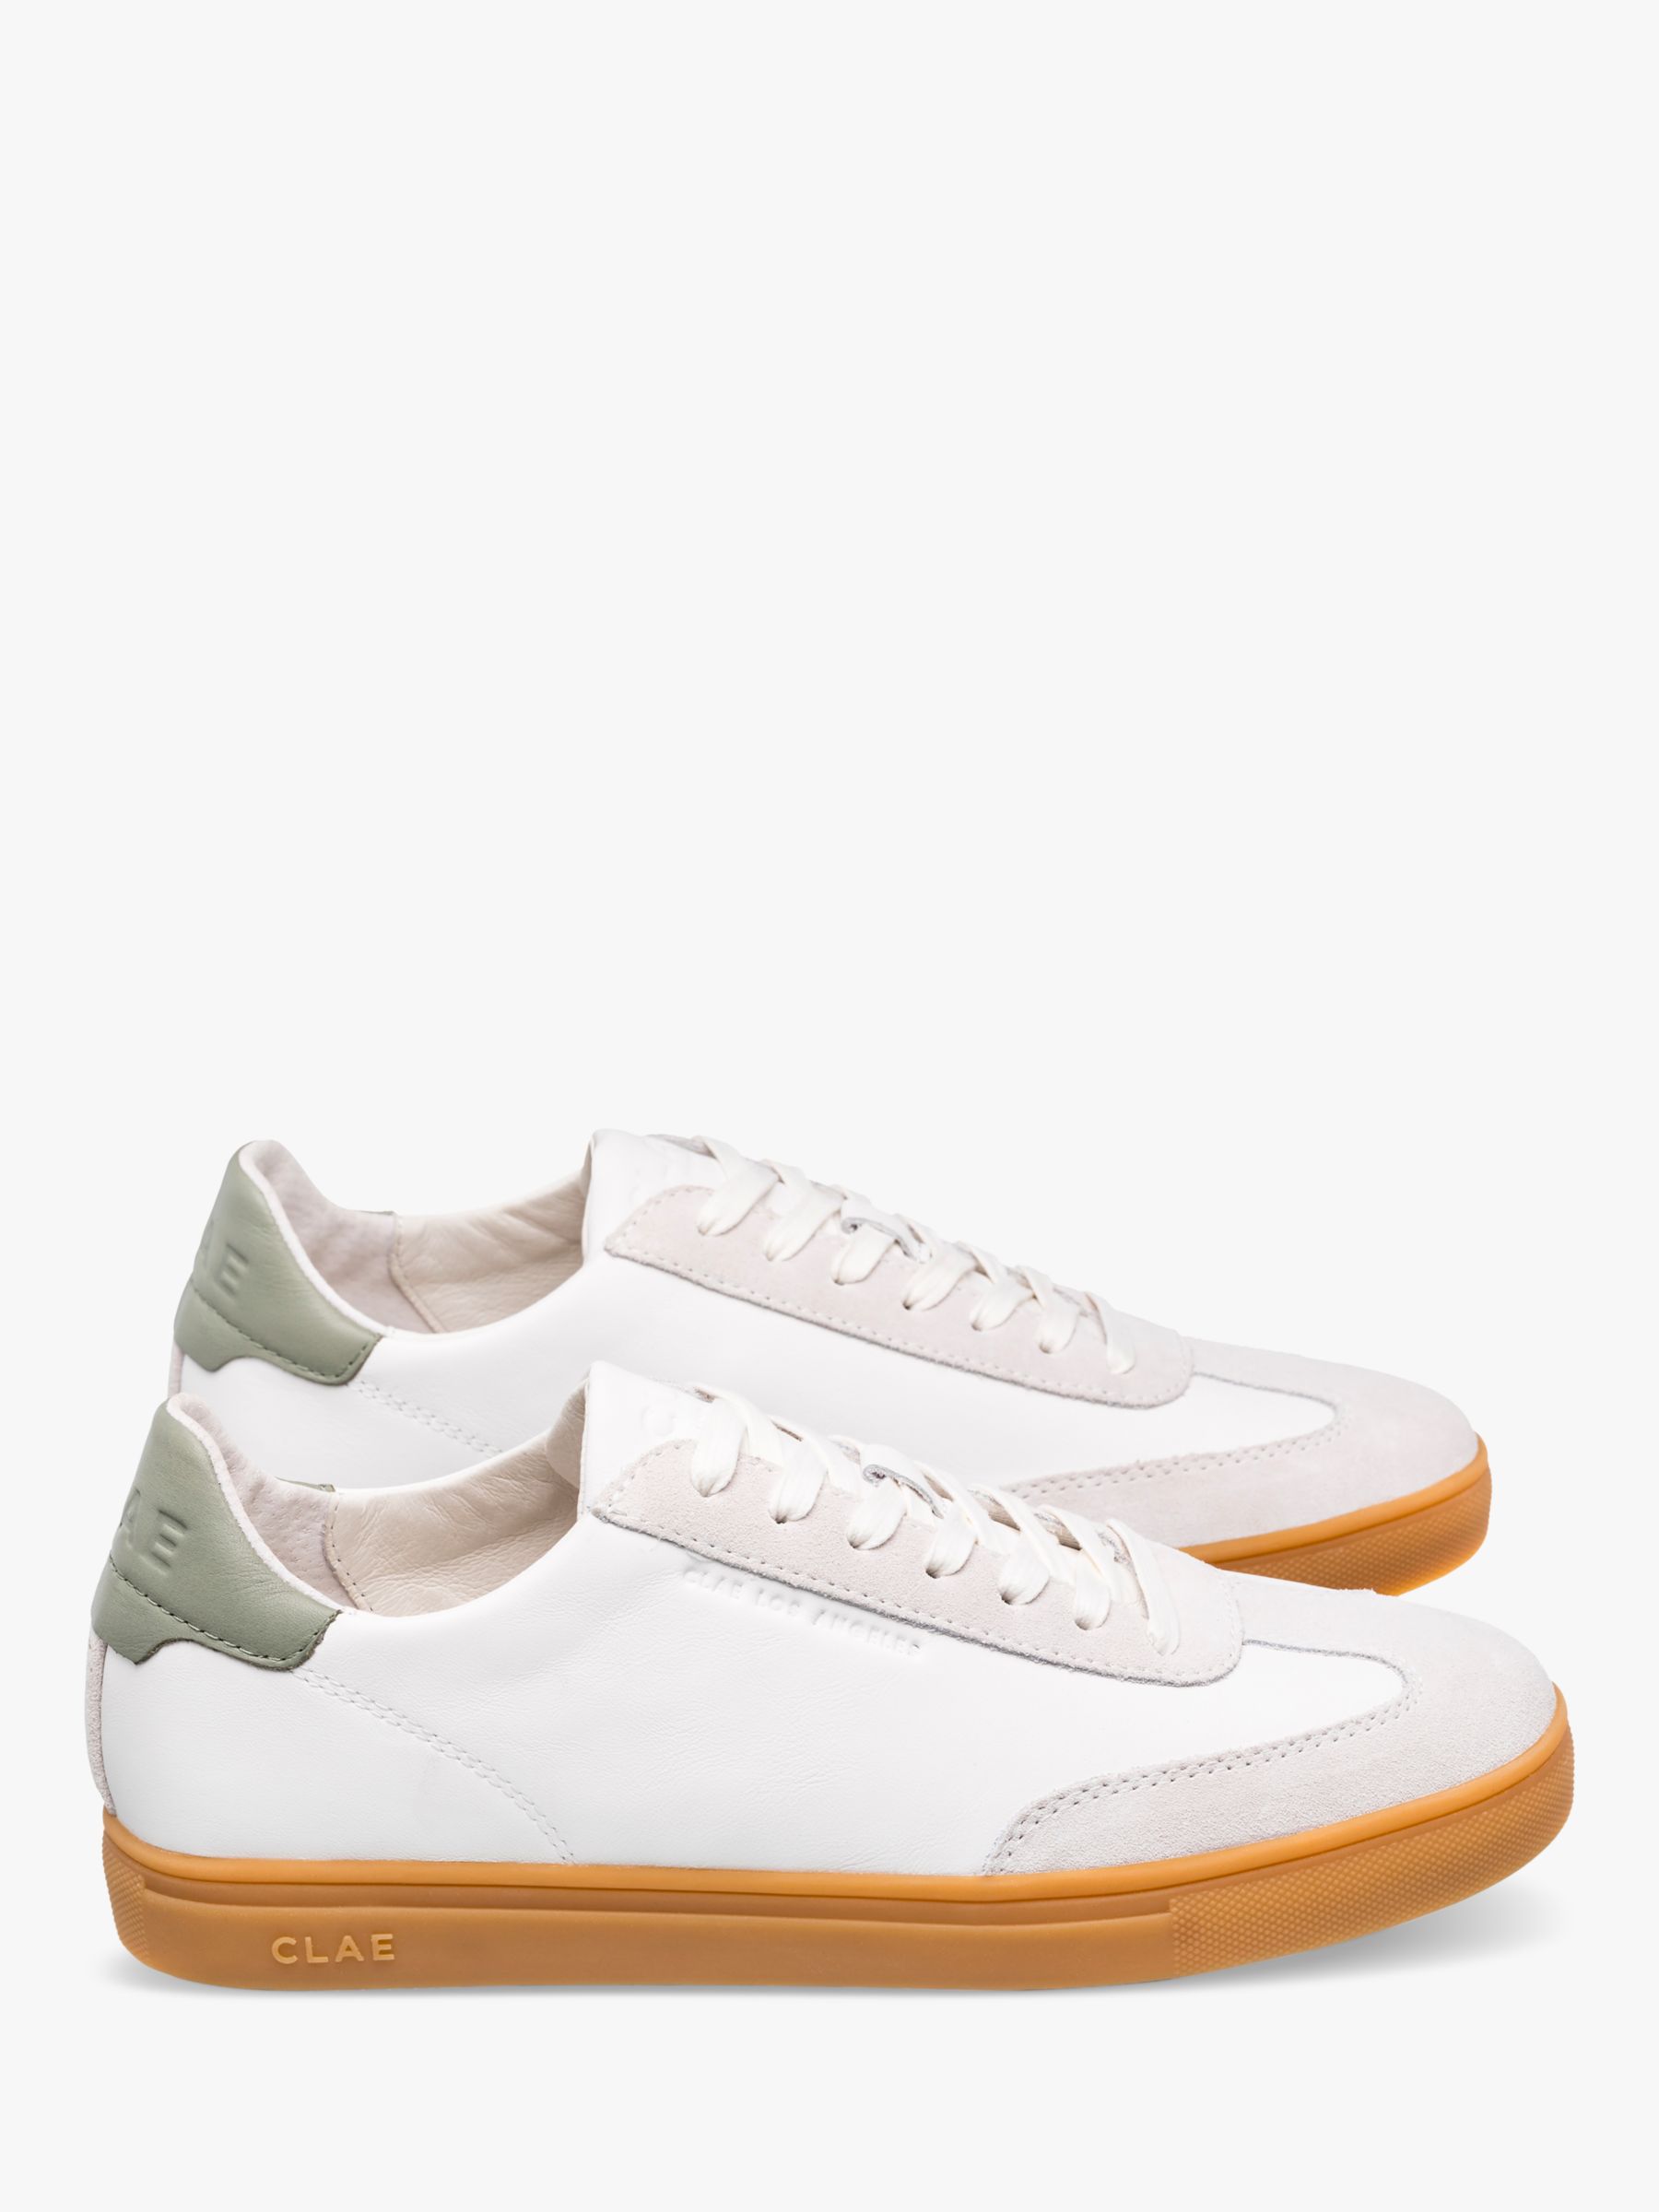 Buy CLAE Deane Leather Low Top Trainers, White Tea Gum Online at johnlewis.com